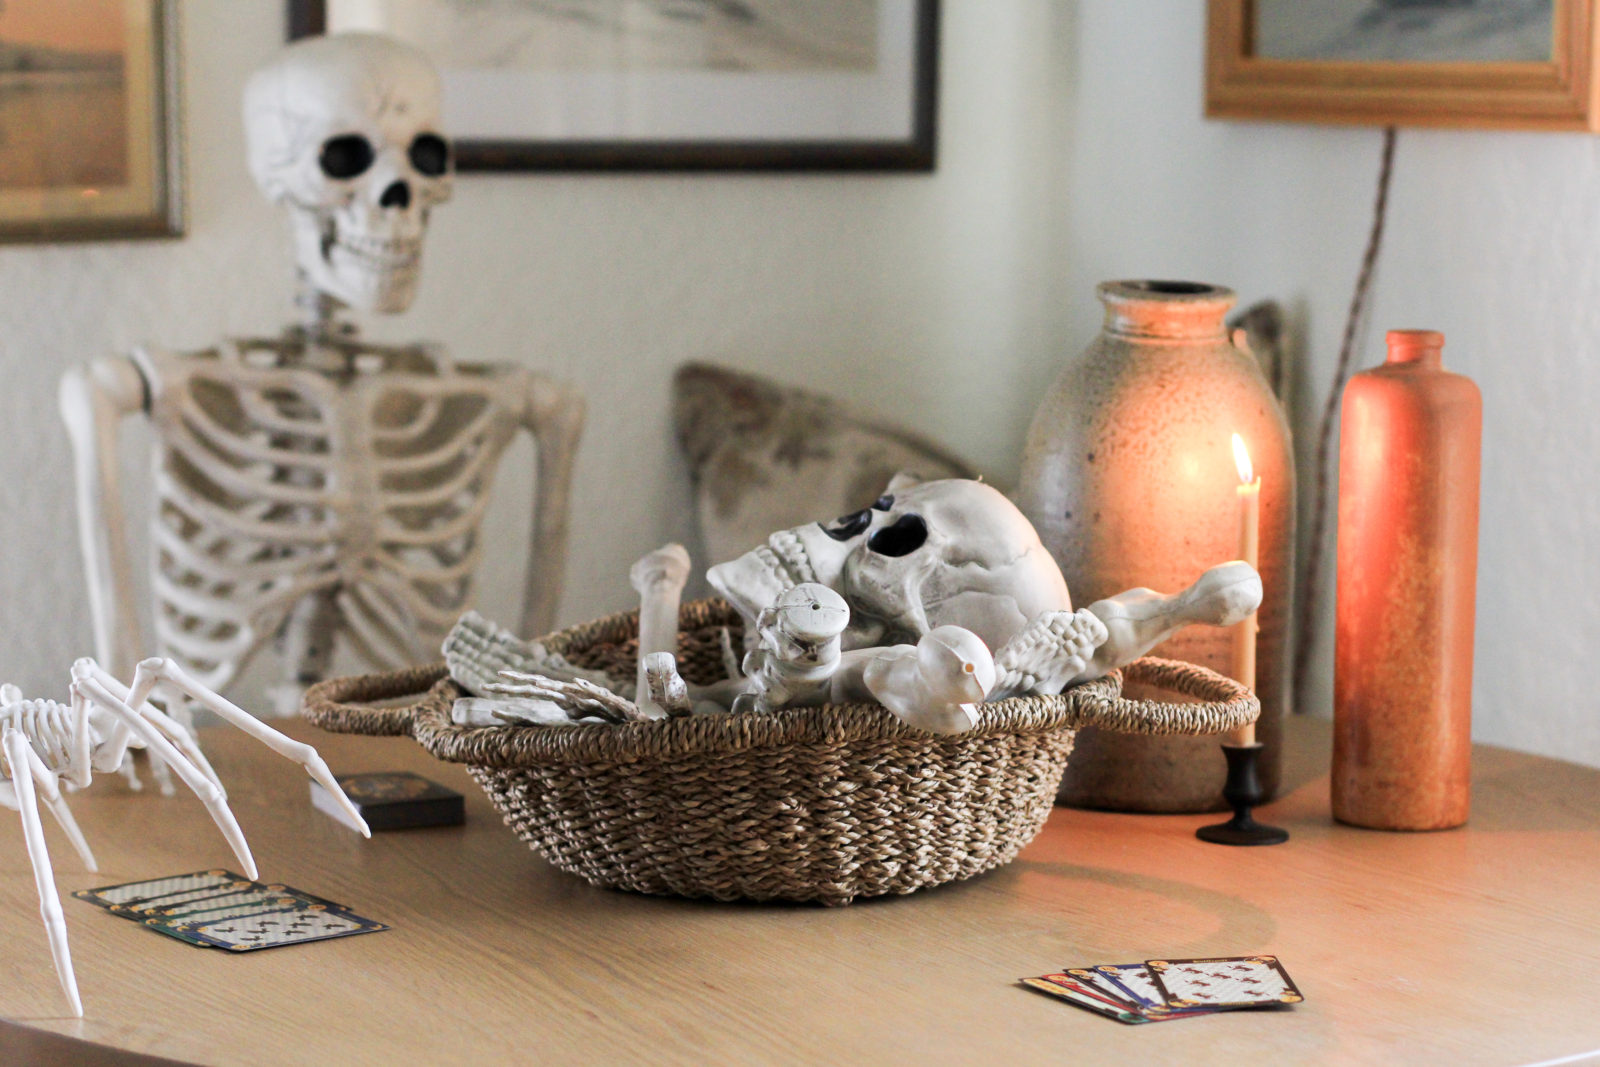 Halloween Decorations Faux Skeletons playing cards.